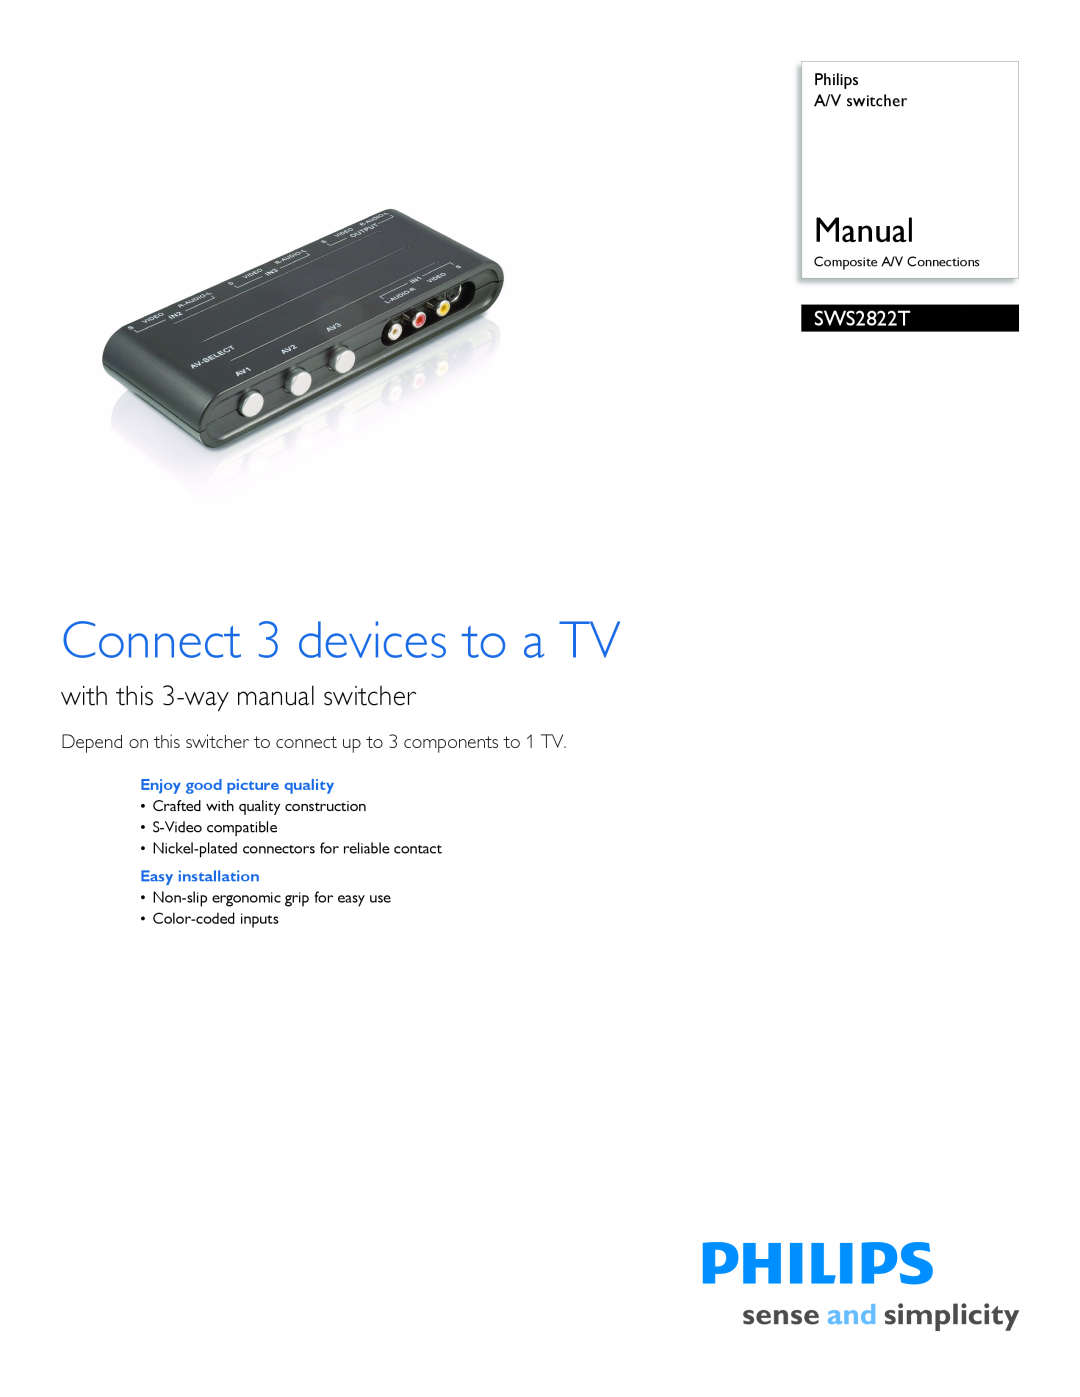 Philips SWS2822T manual Philips A/V switcher, Enjoy good picture quality, Easy installation, Connect 3 devices to a TV 